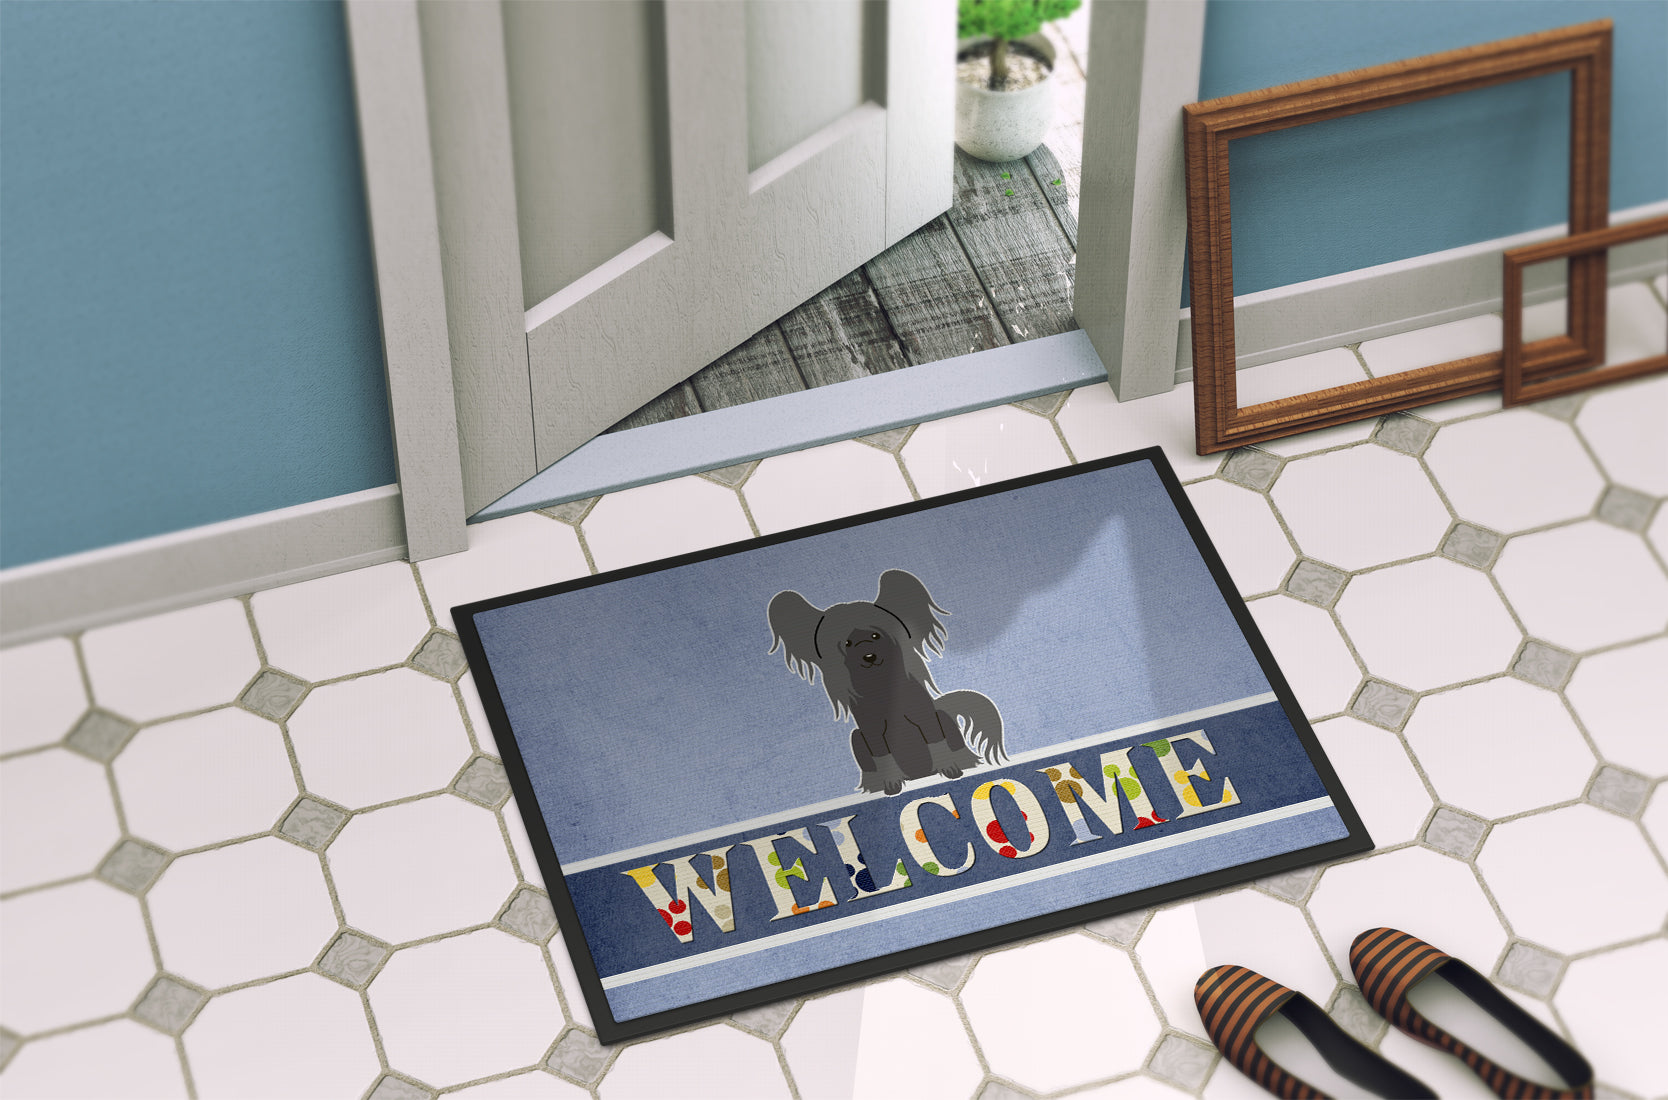 Chinese Crested Black Welcome Indoor or Outdoor Mat 18x27 BB5693MAT - the-store.com